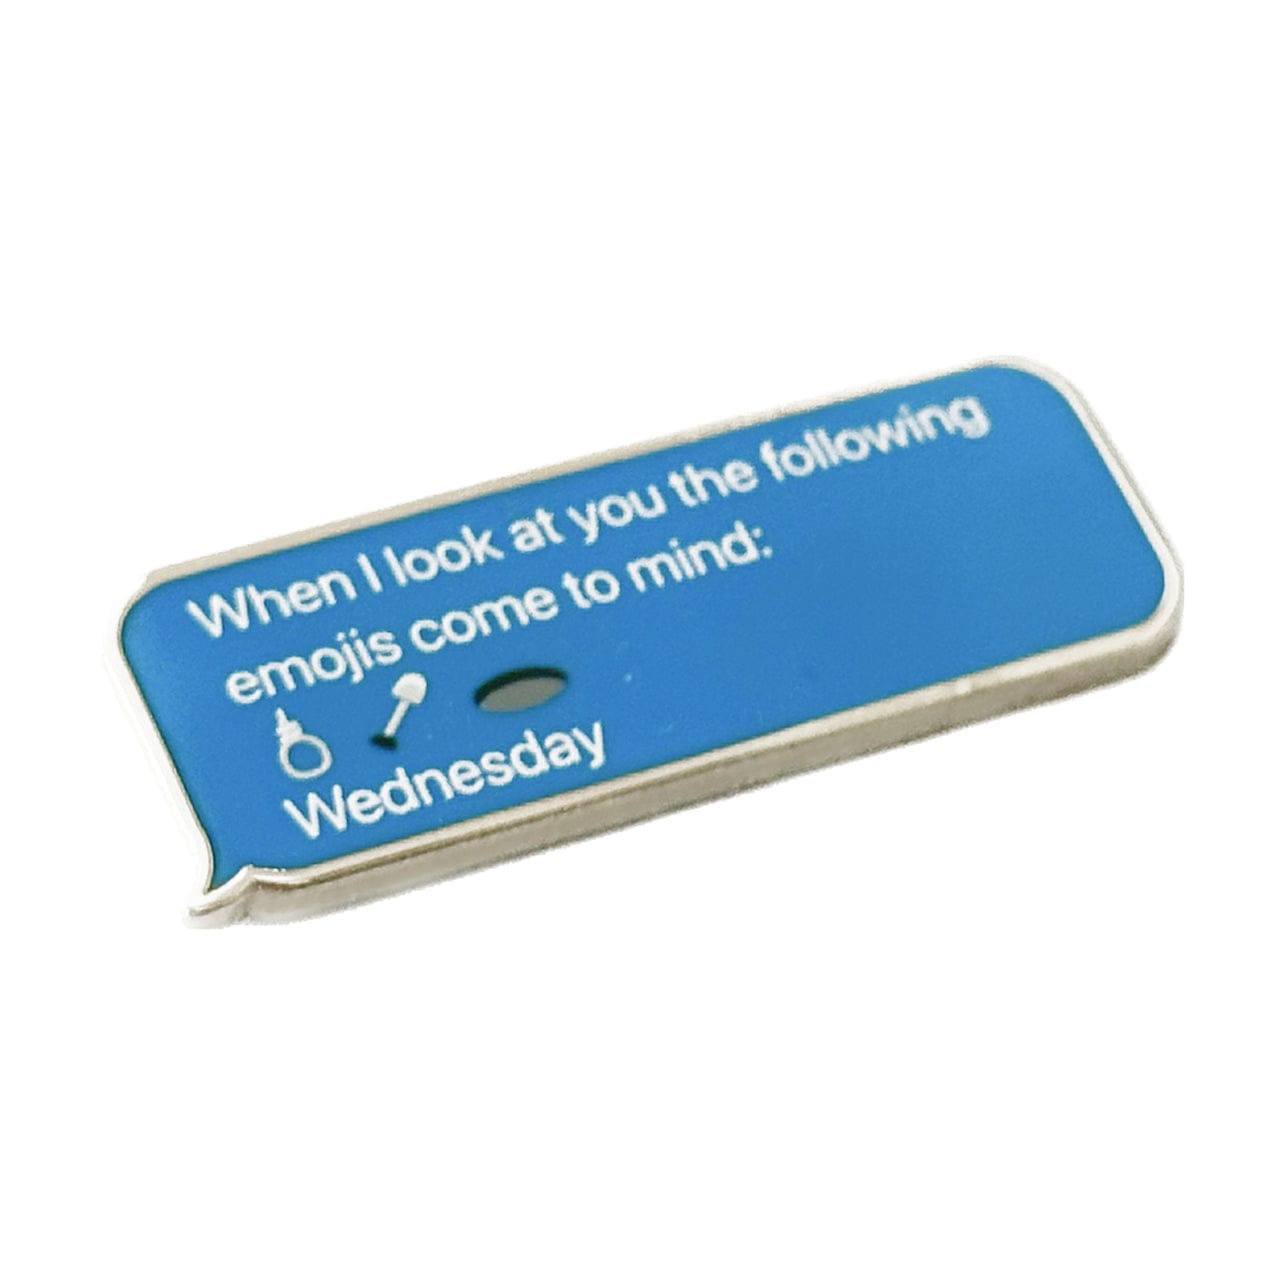 Pinbuds Enamel pin Rope shove hole message pin featuring quote featuring Wednesday Adam's quote  "When I look at you, the following emojis come to mind. Rope. Shovel. Hole"